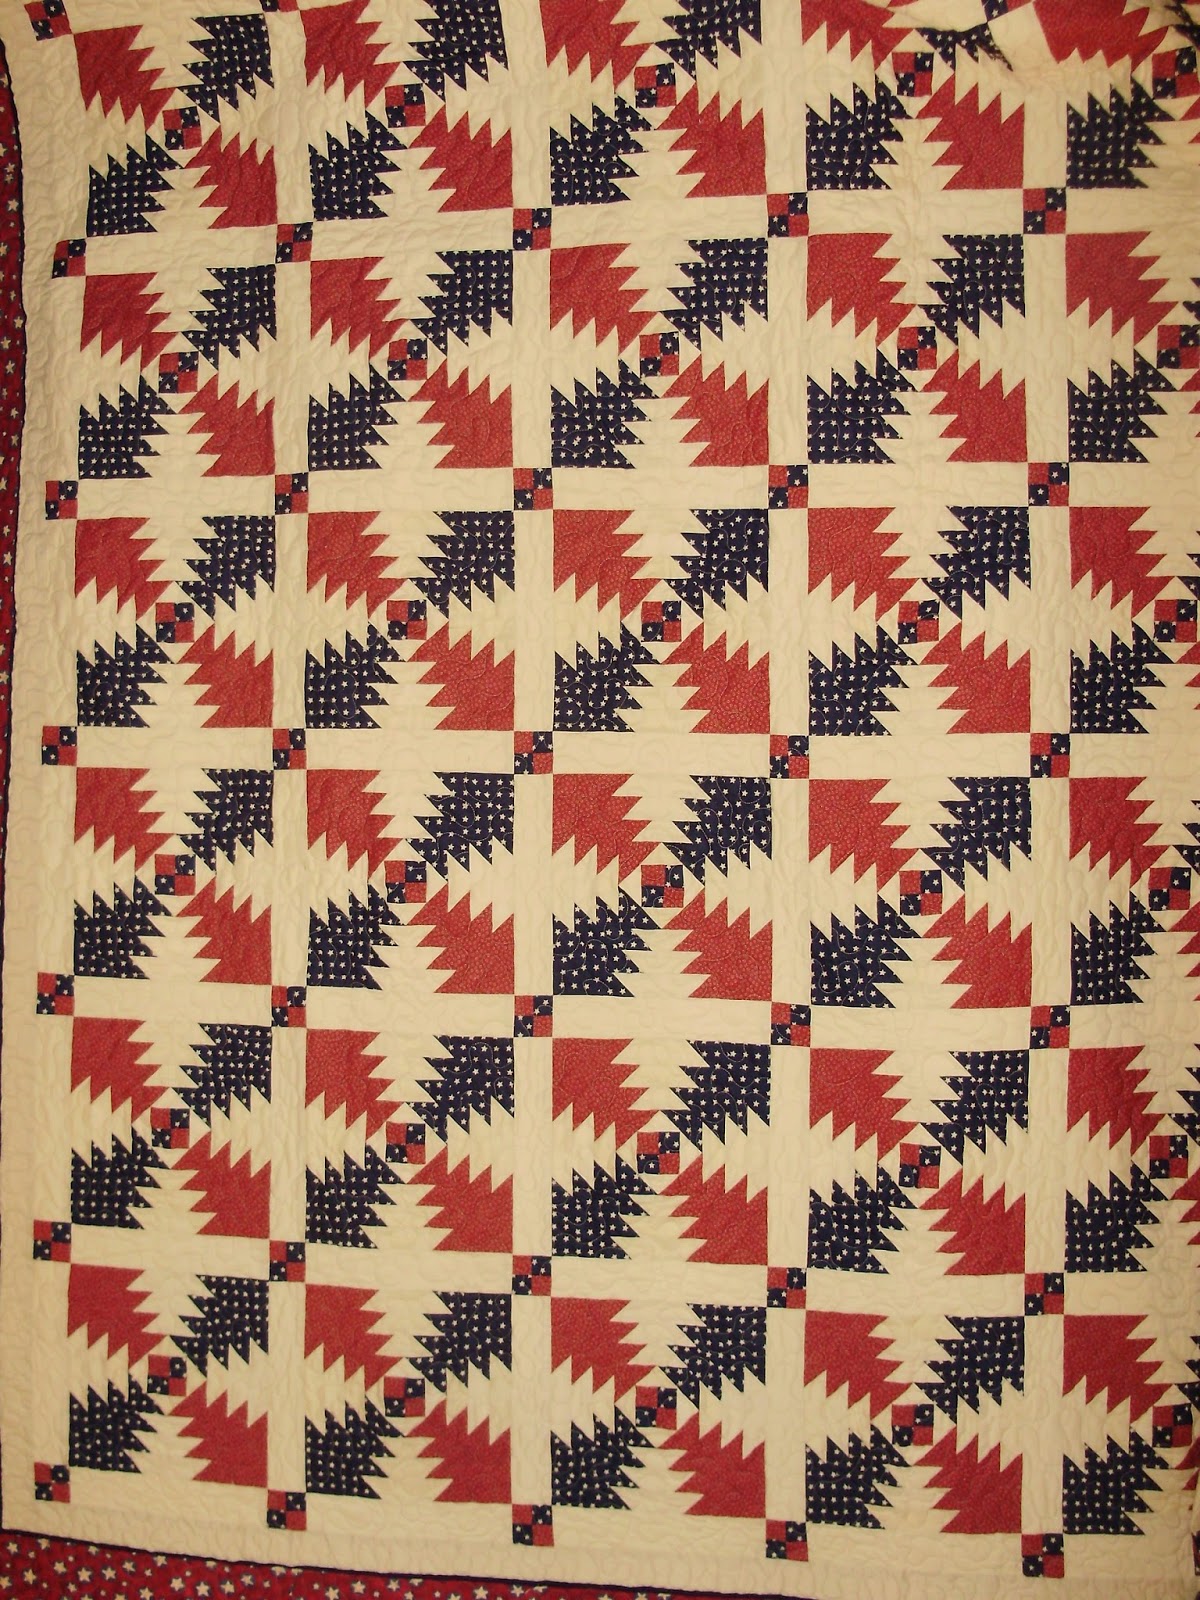 Patriotic Quilt, Red, White and Blue Quilt, Sashings and Cornerstones, Pieced Cornerstones, Pineapple Quilt